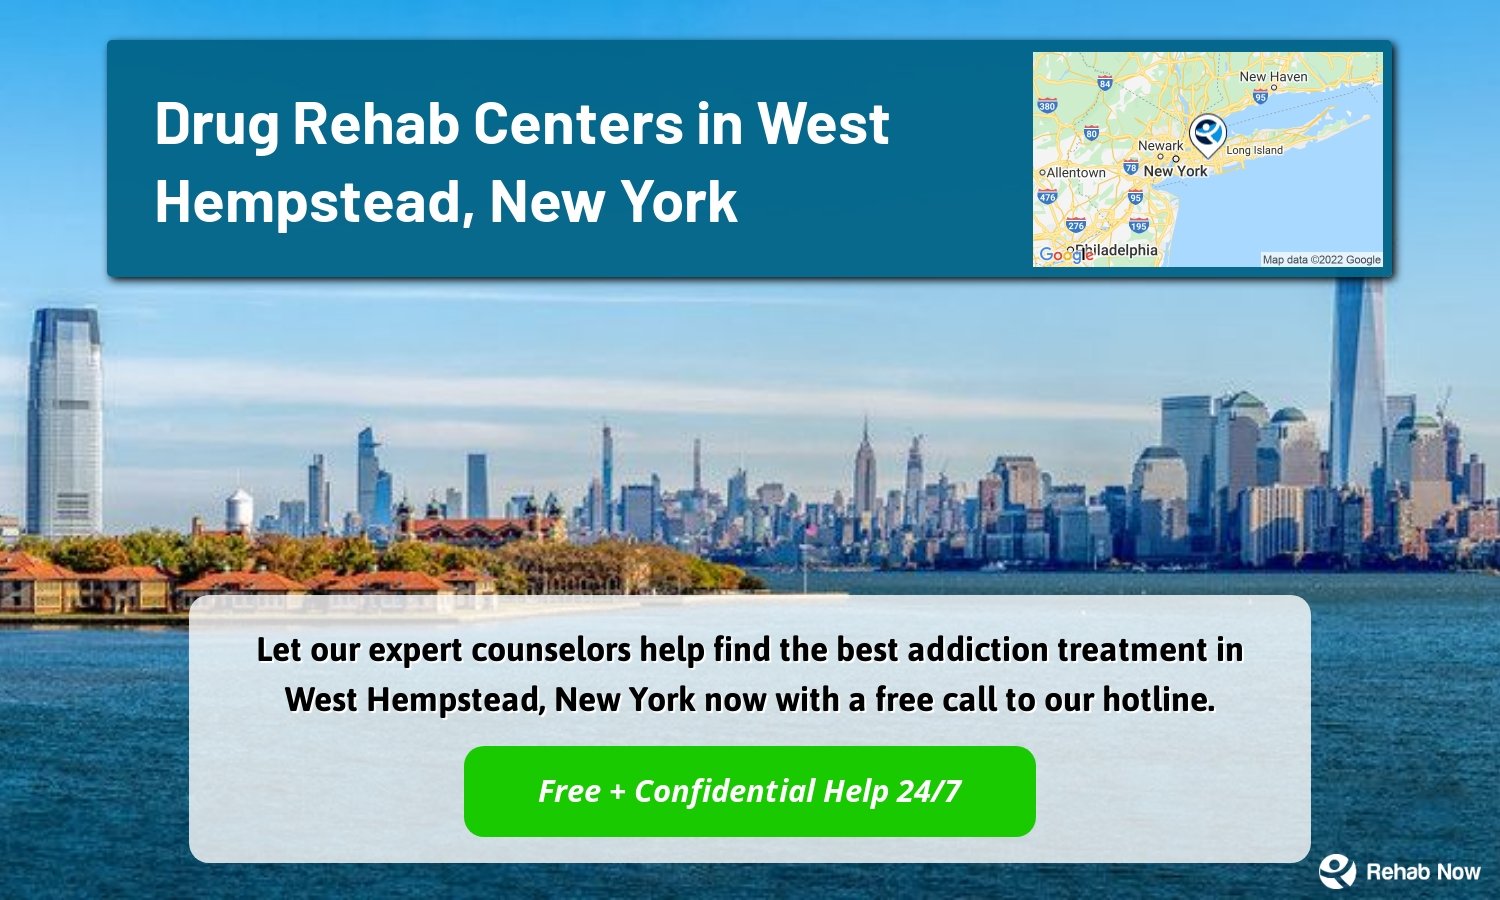 Let our expert counselors help find the best addiction treatment in West Hempstead, New York now with a free call to our hotline.